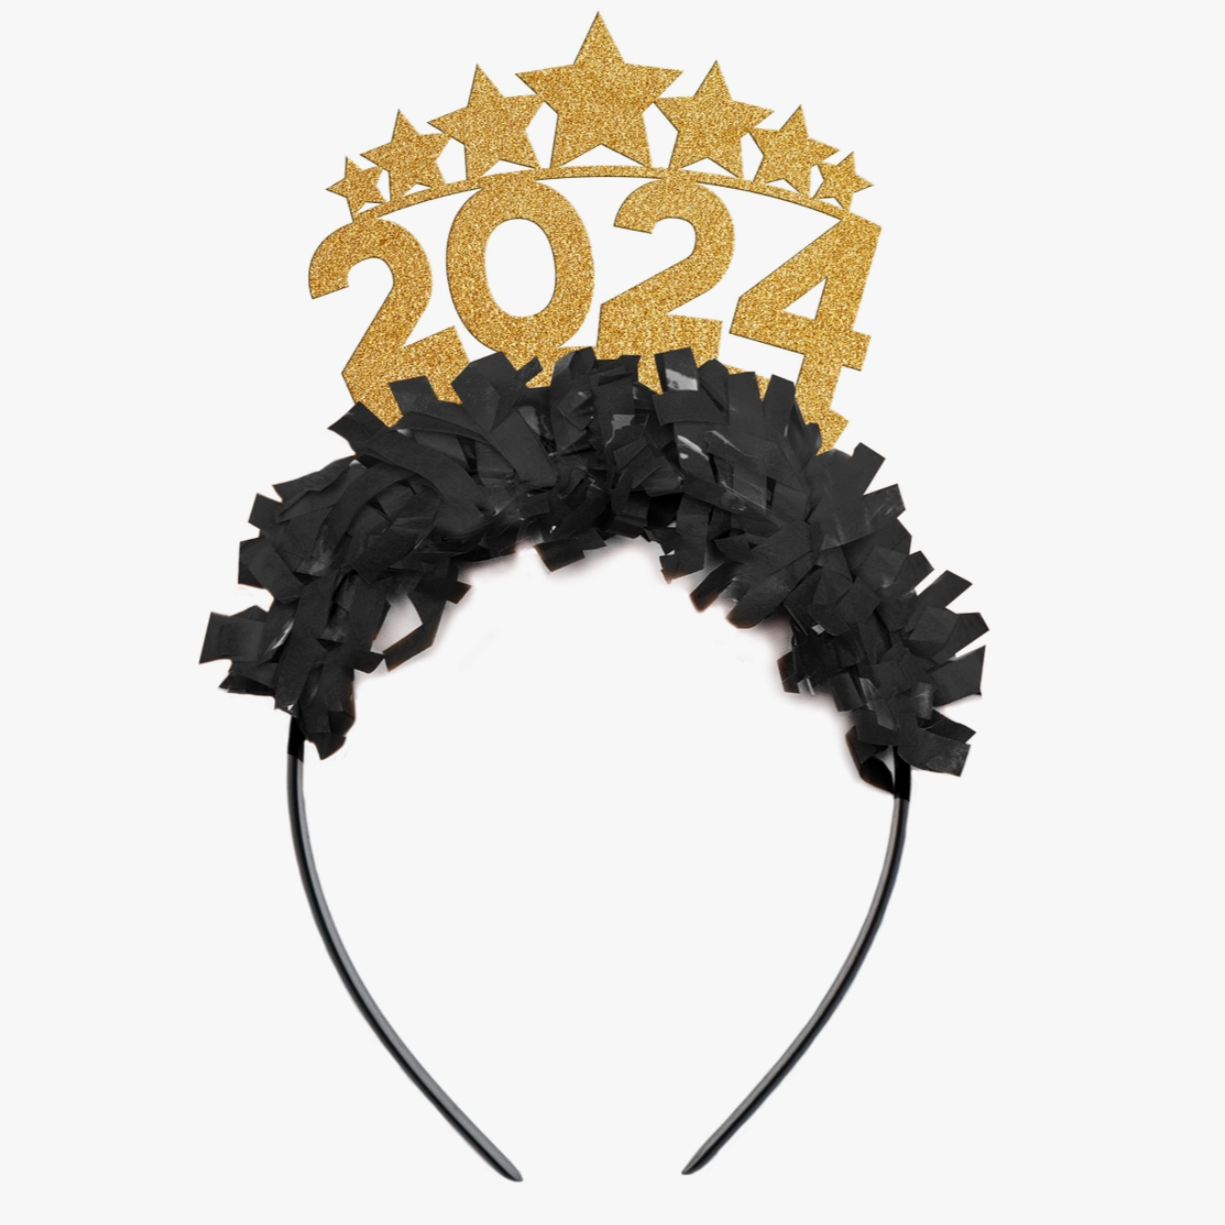 2024 Stars Gold Party Crown